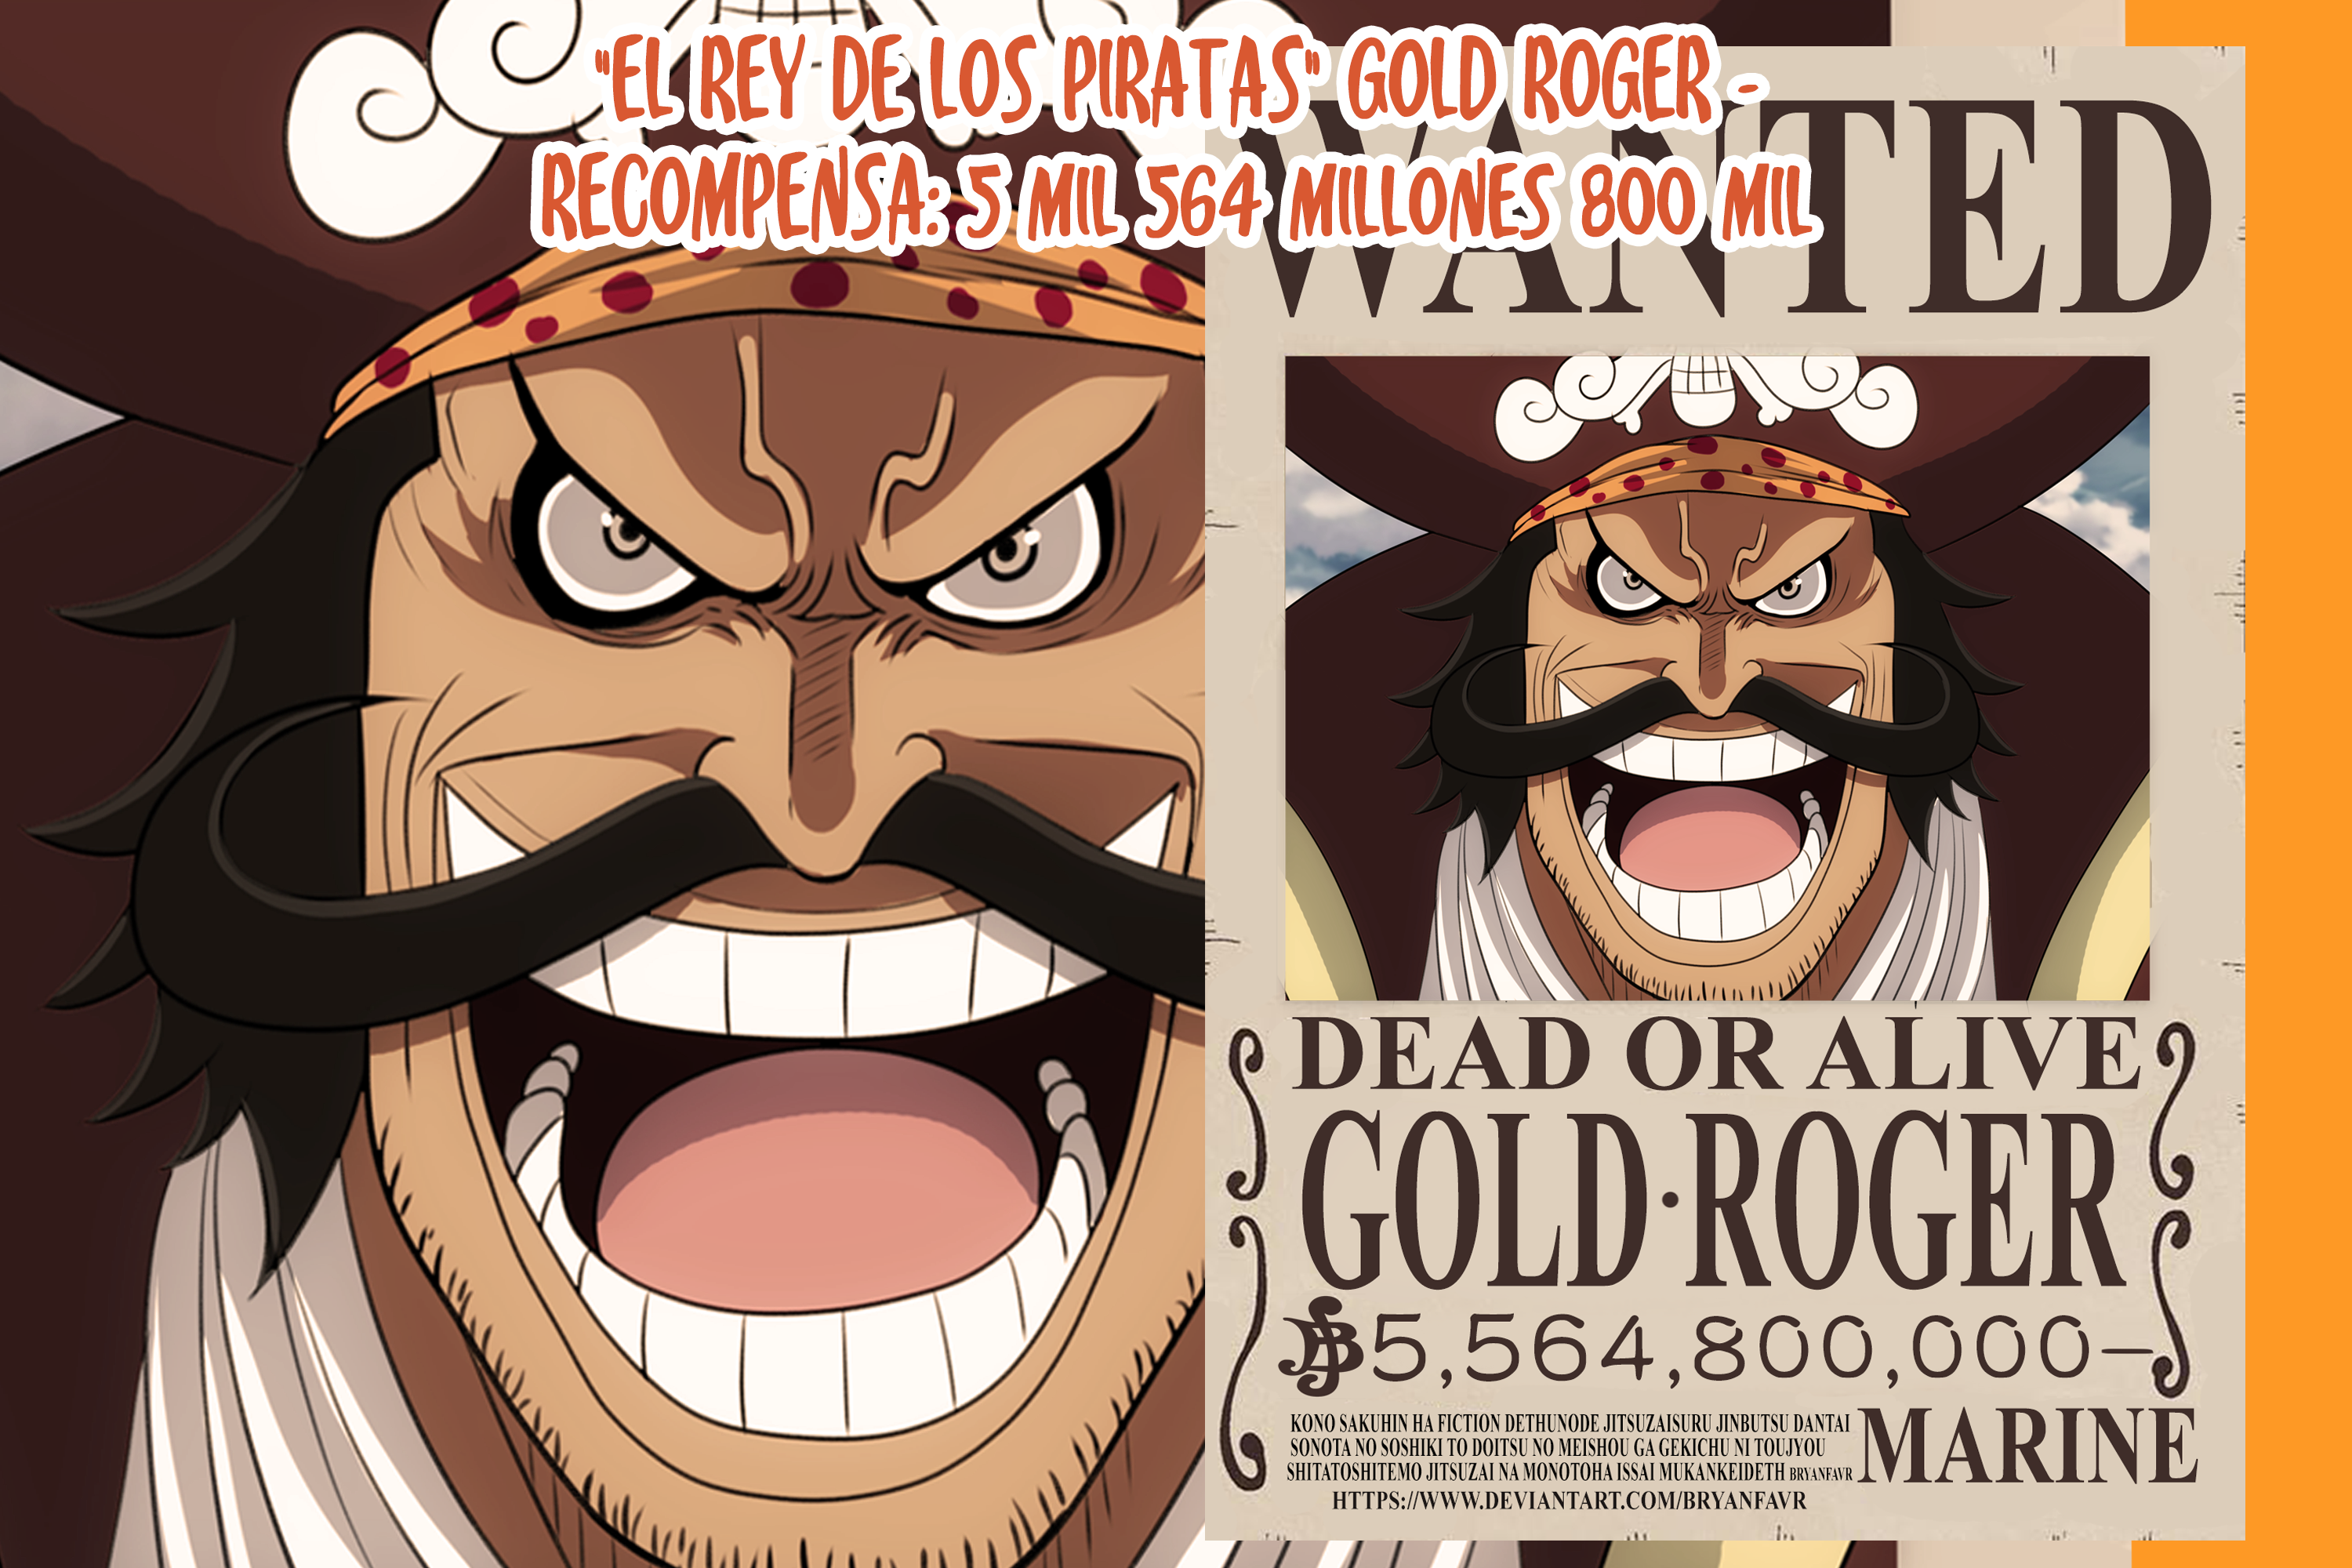 One Piece - Affiche Wanted Gold.D Roger